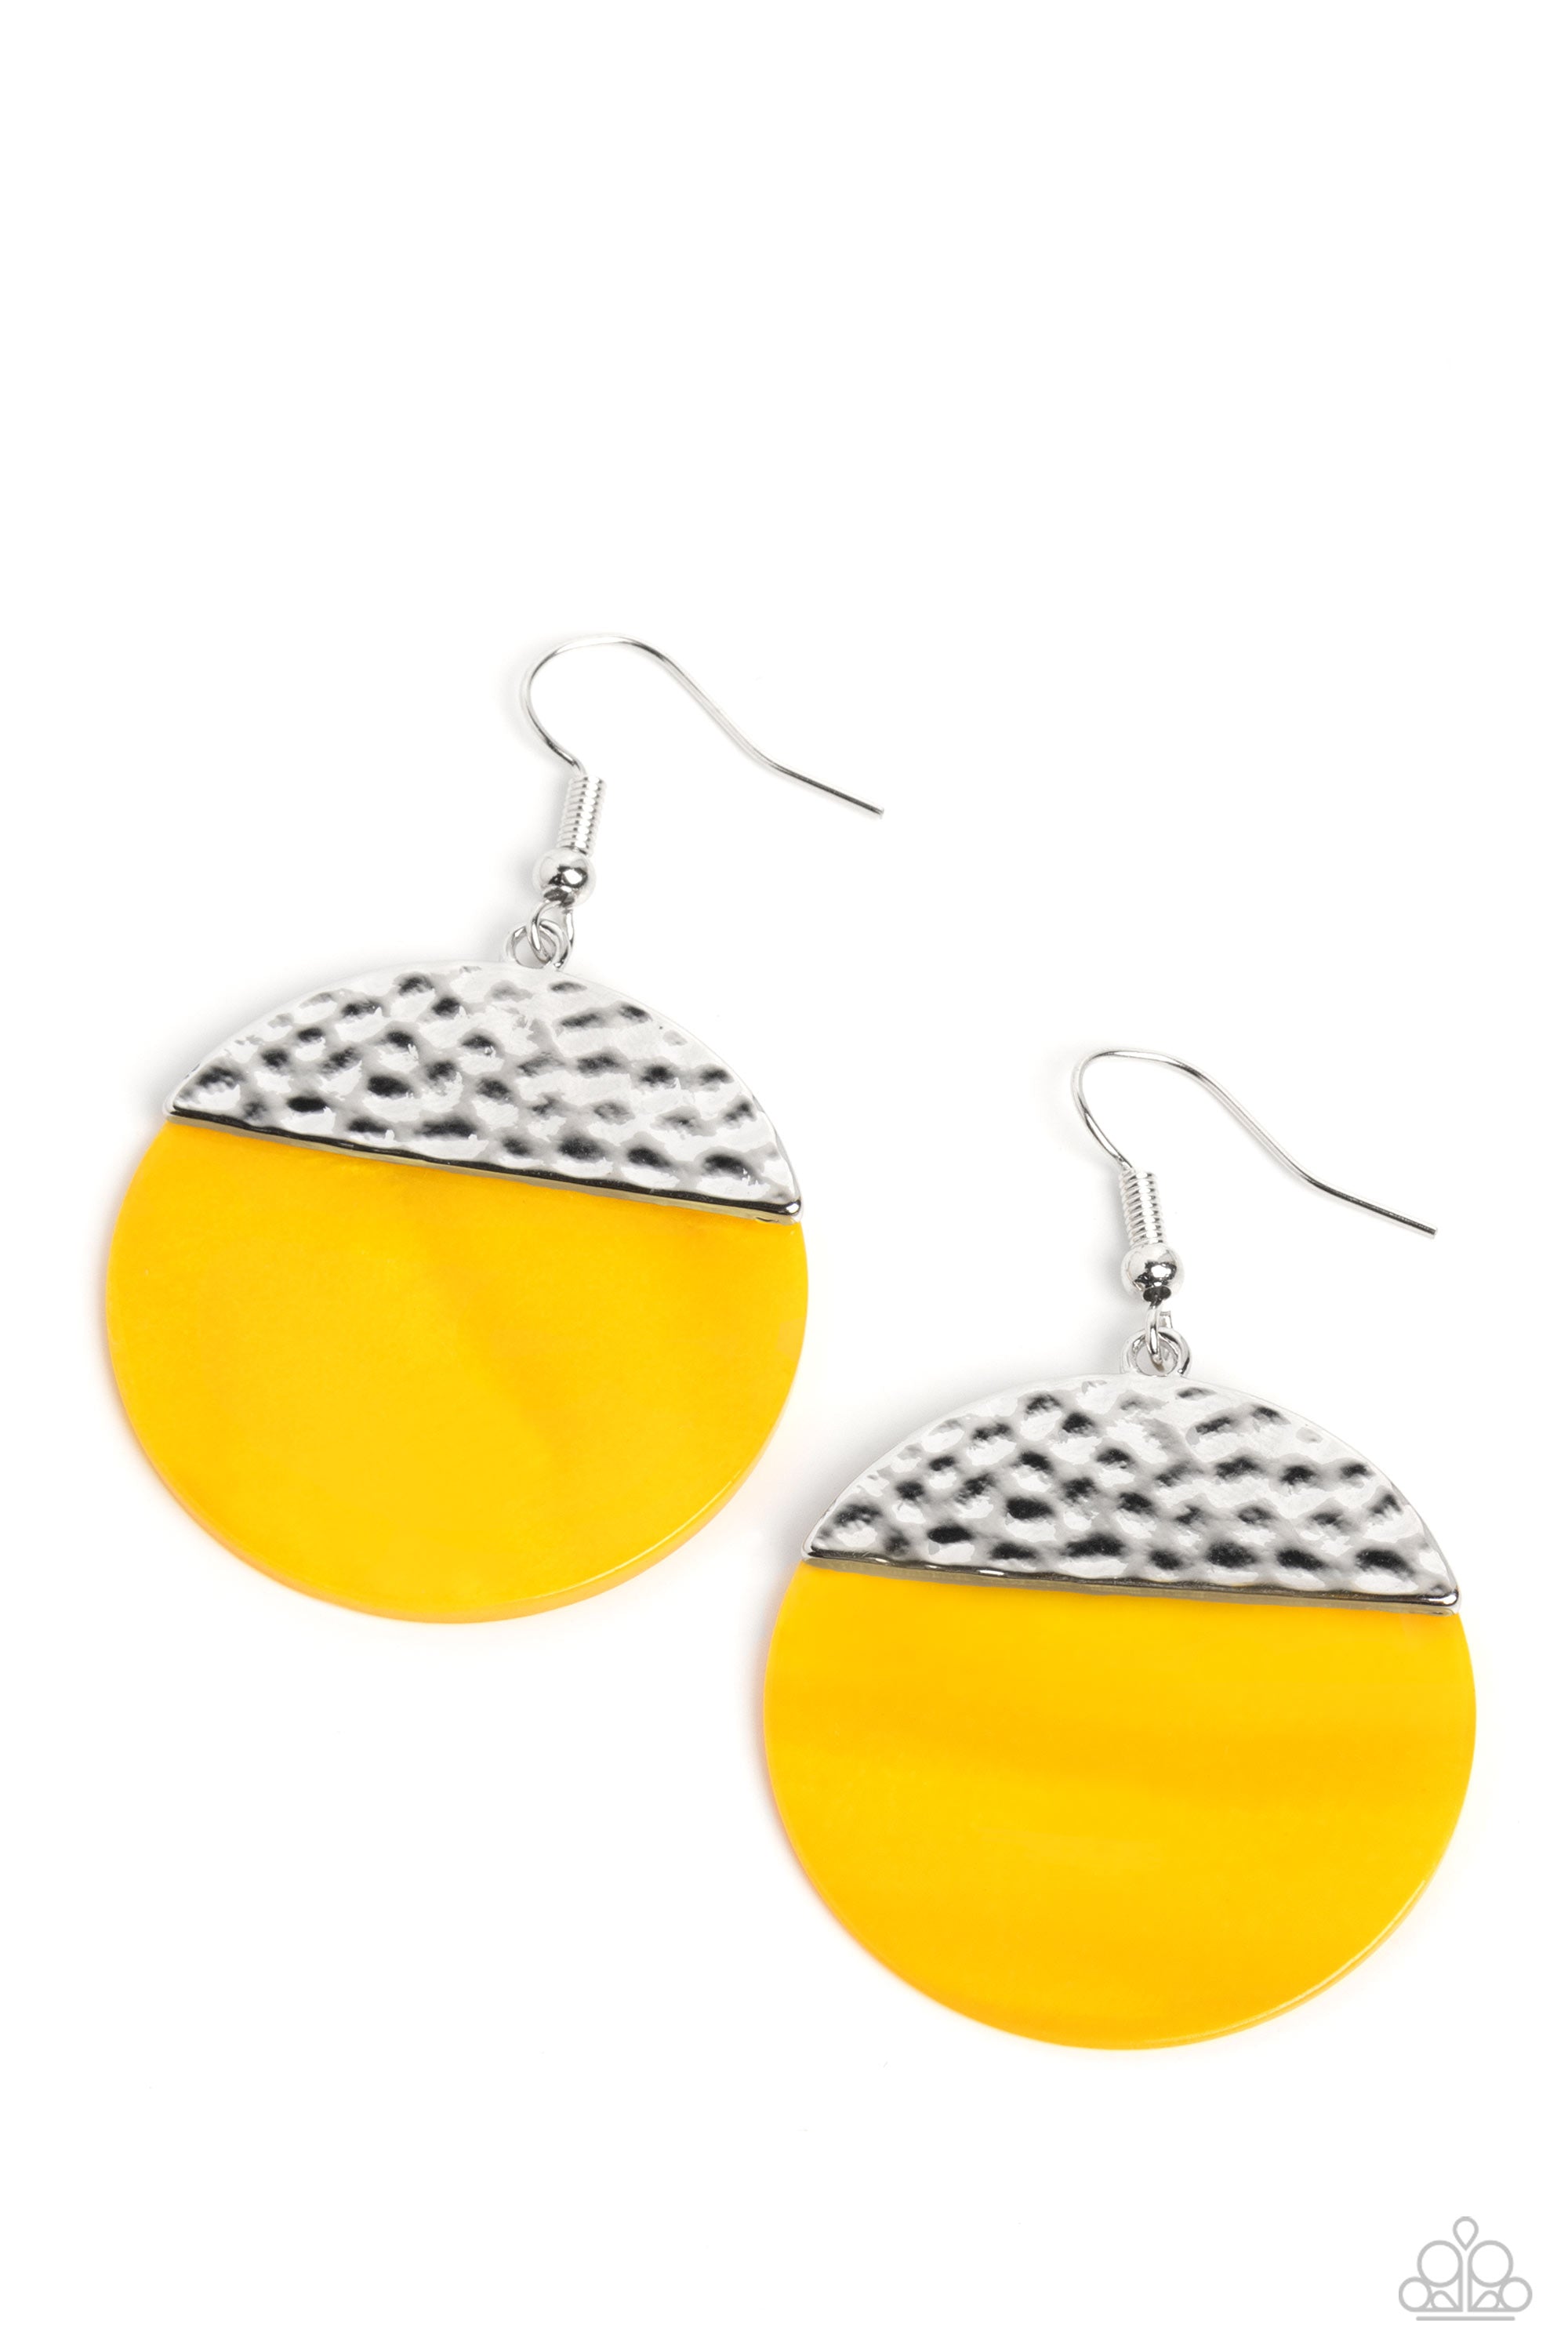 SHELL Out Yellow Earrings - Paparazzi Accessories- lightbox - CarasShop.com - $5 Jewelry by Cara Jewels